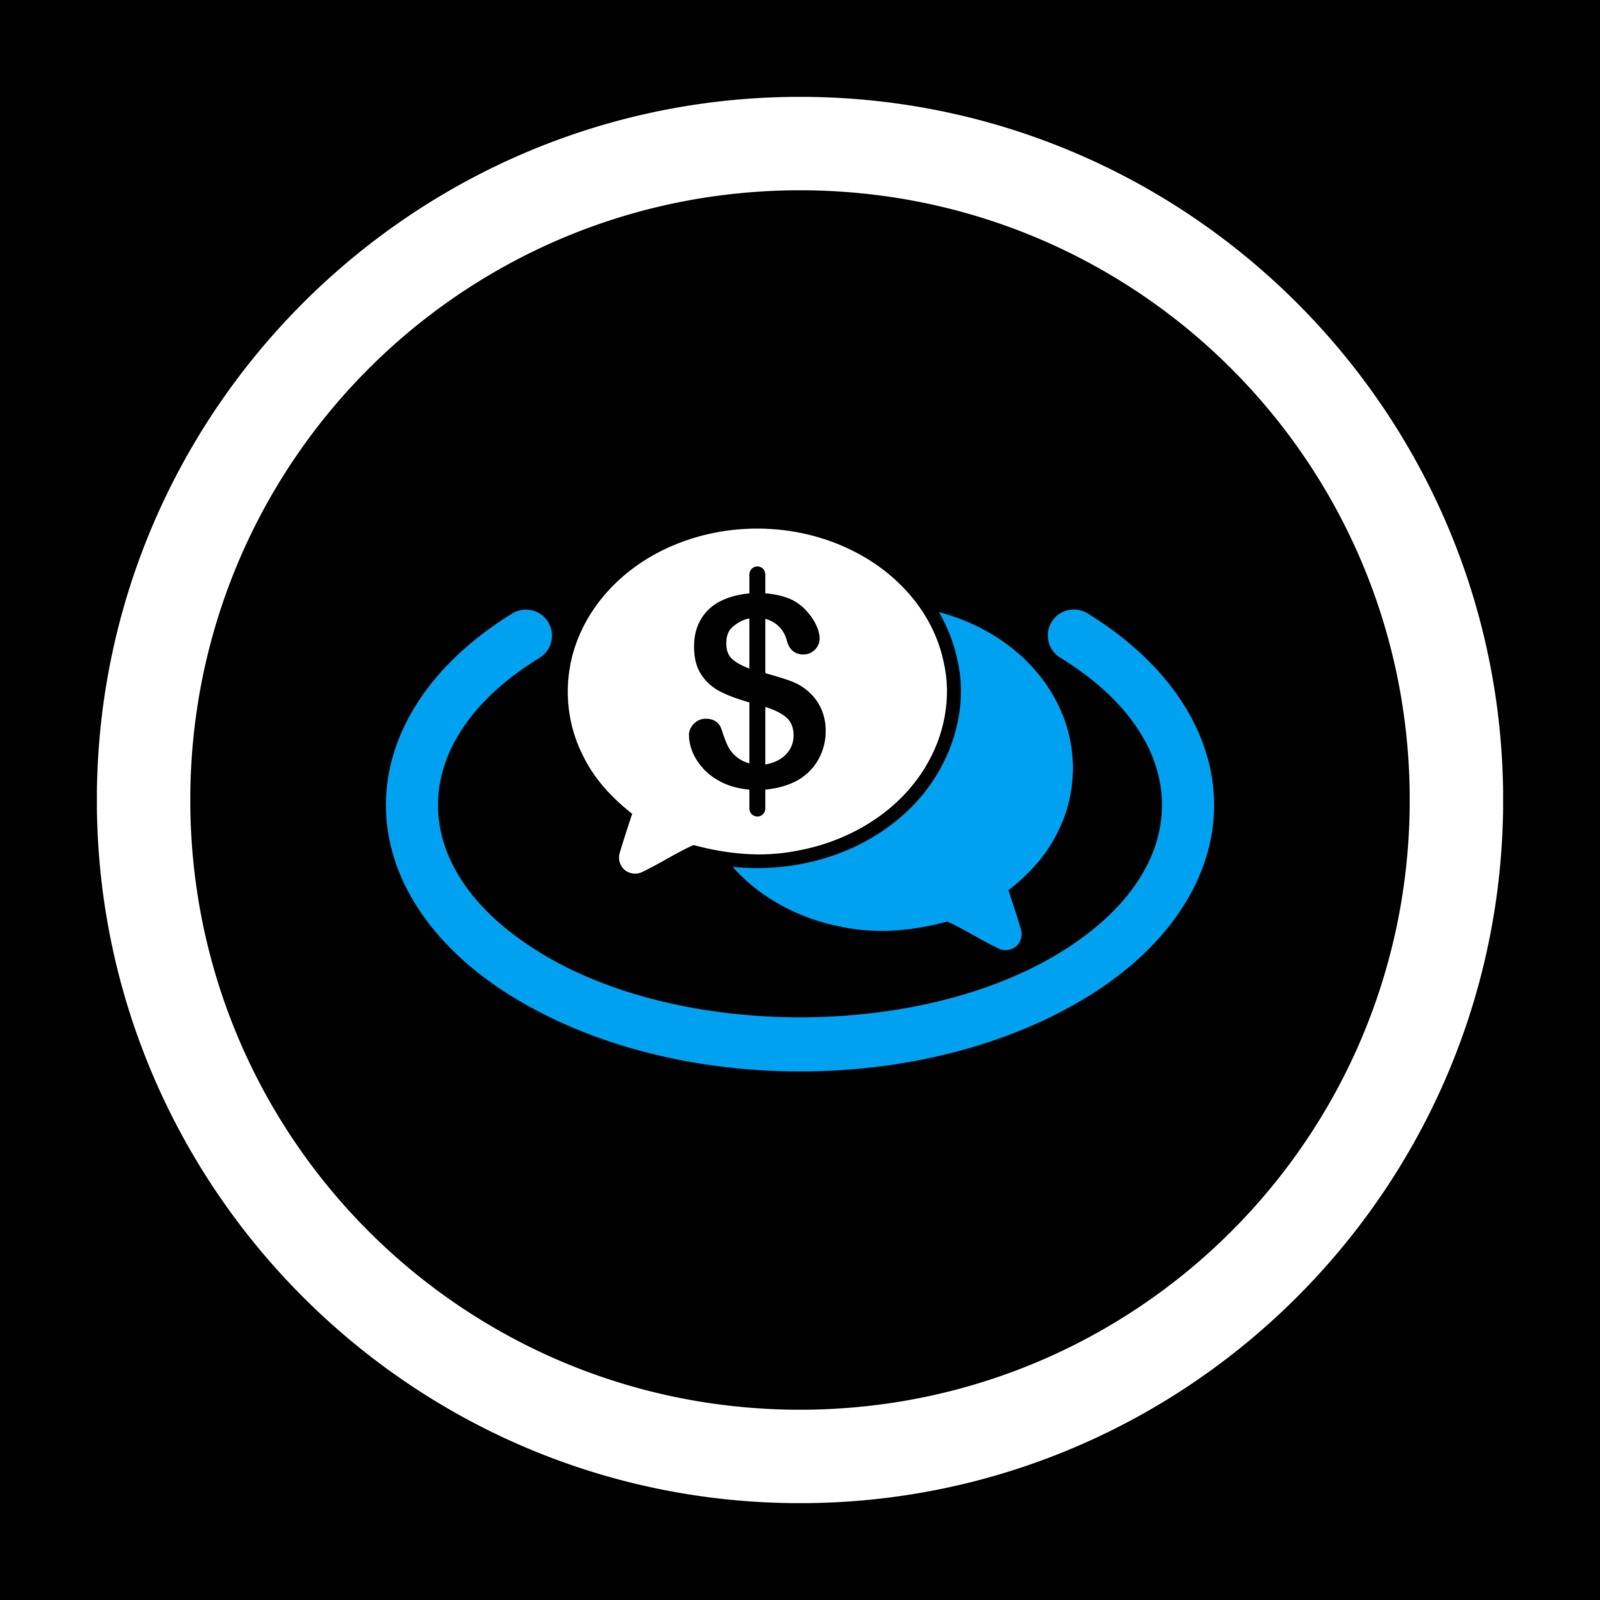 Financial Network vector icon. This flat rounded symbol uses blue and white colors and isolated on a black background.